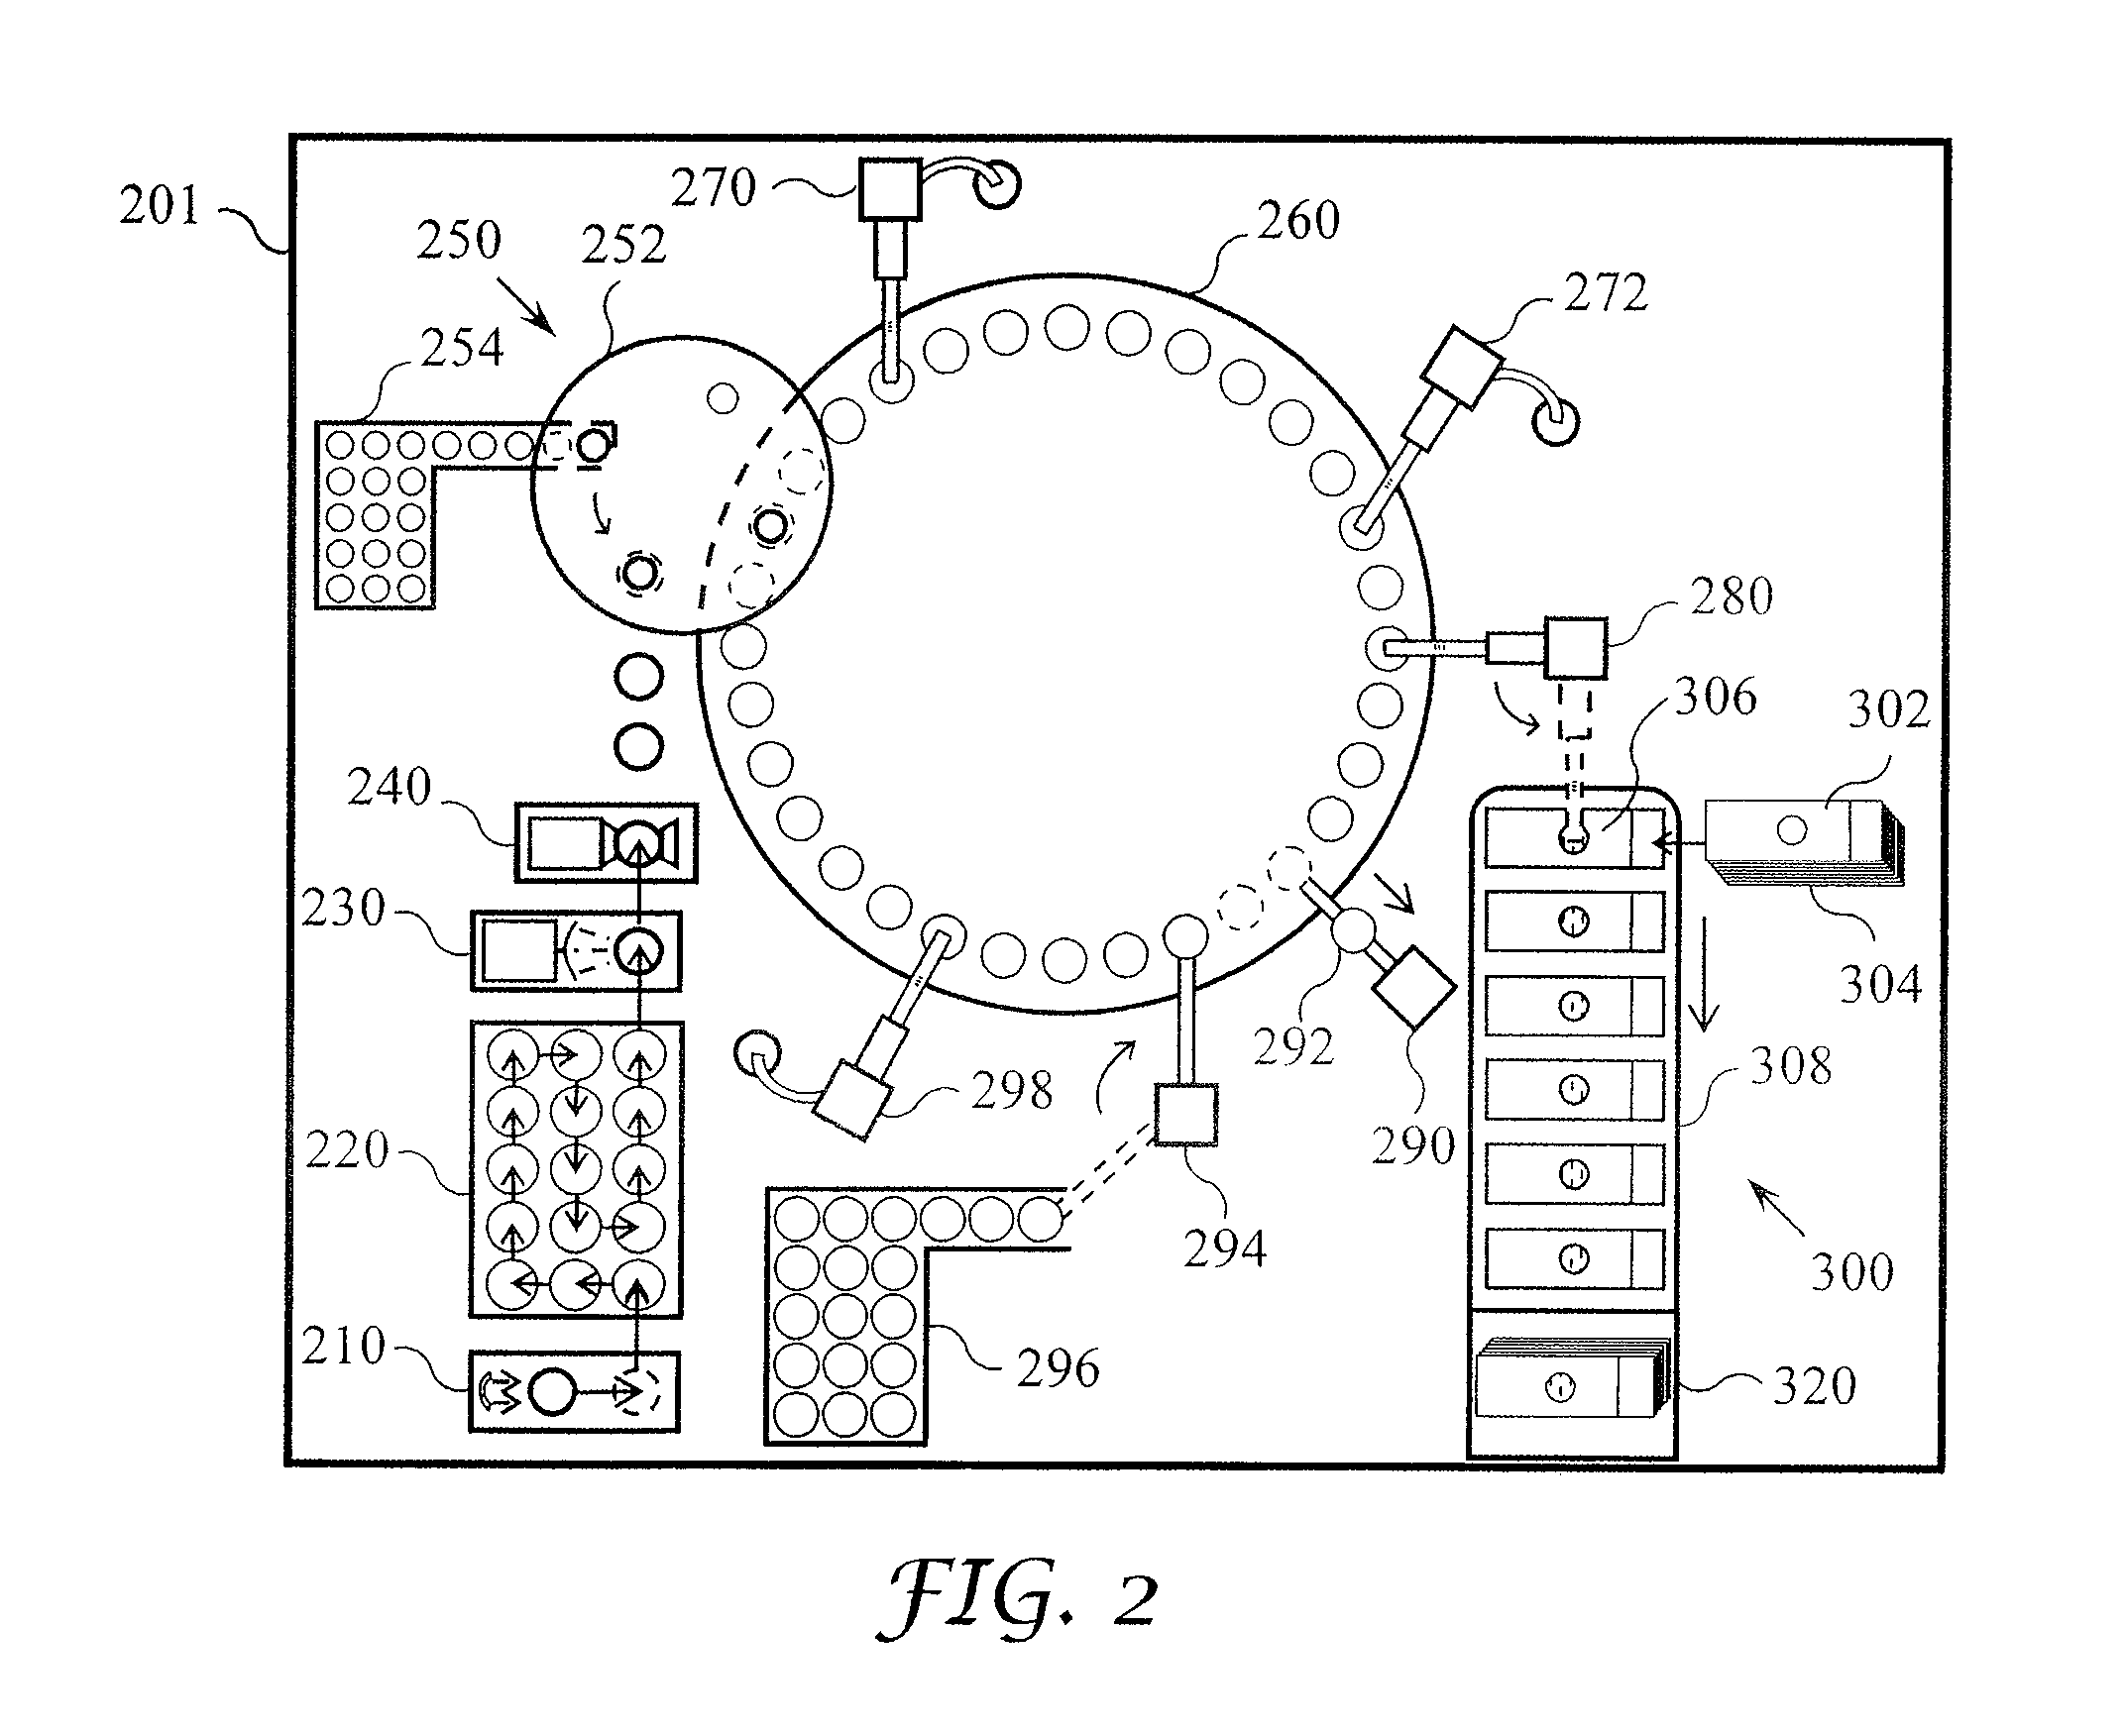 Integrated sequential sample preparation system